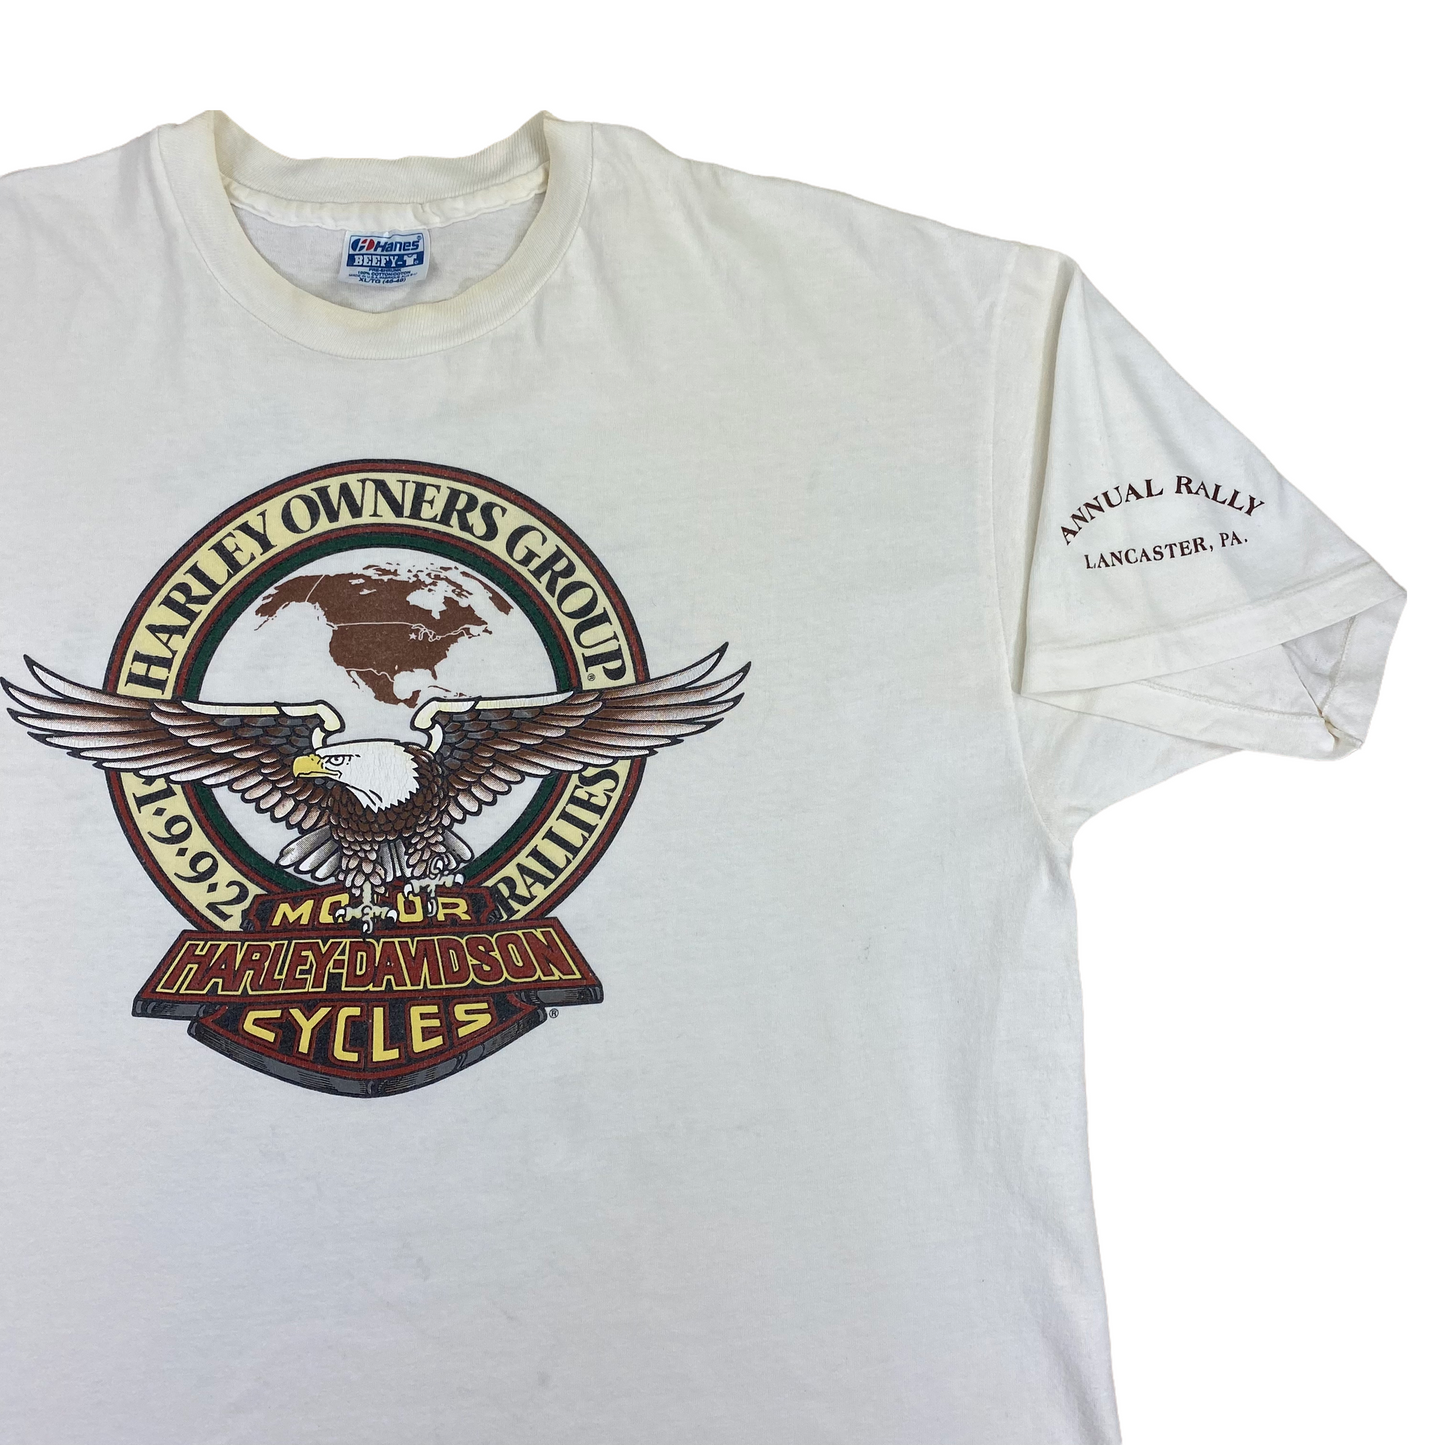 1992 Harley owners group tee XL